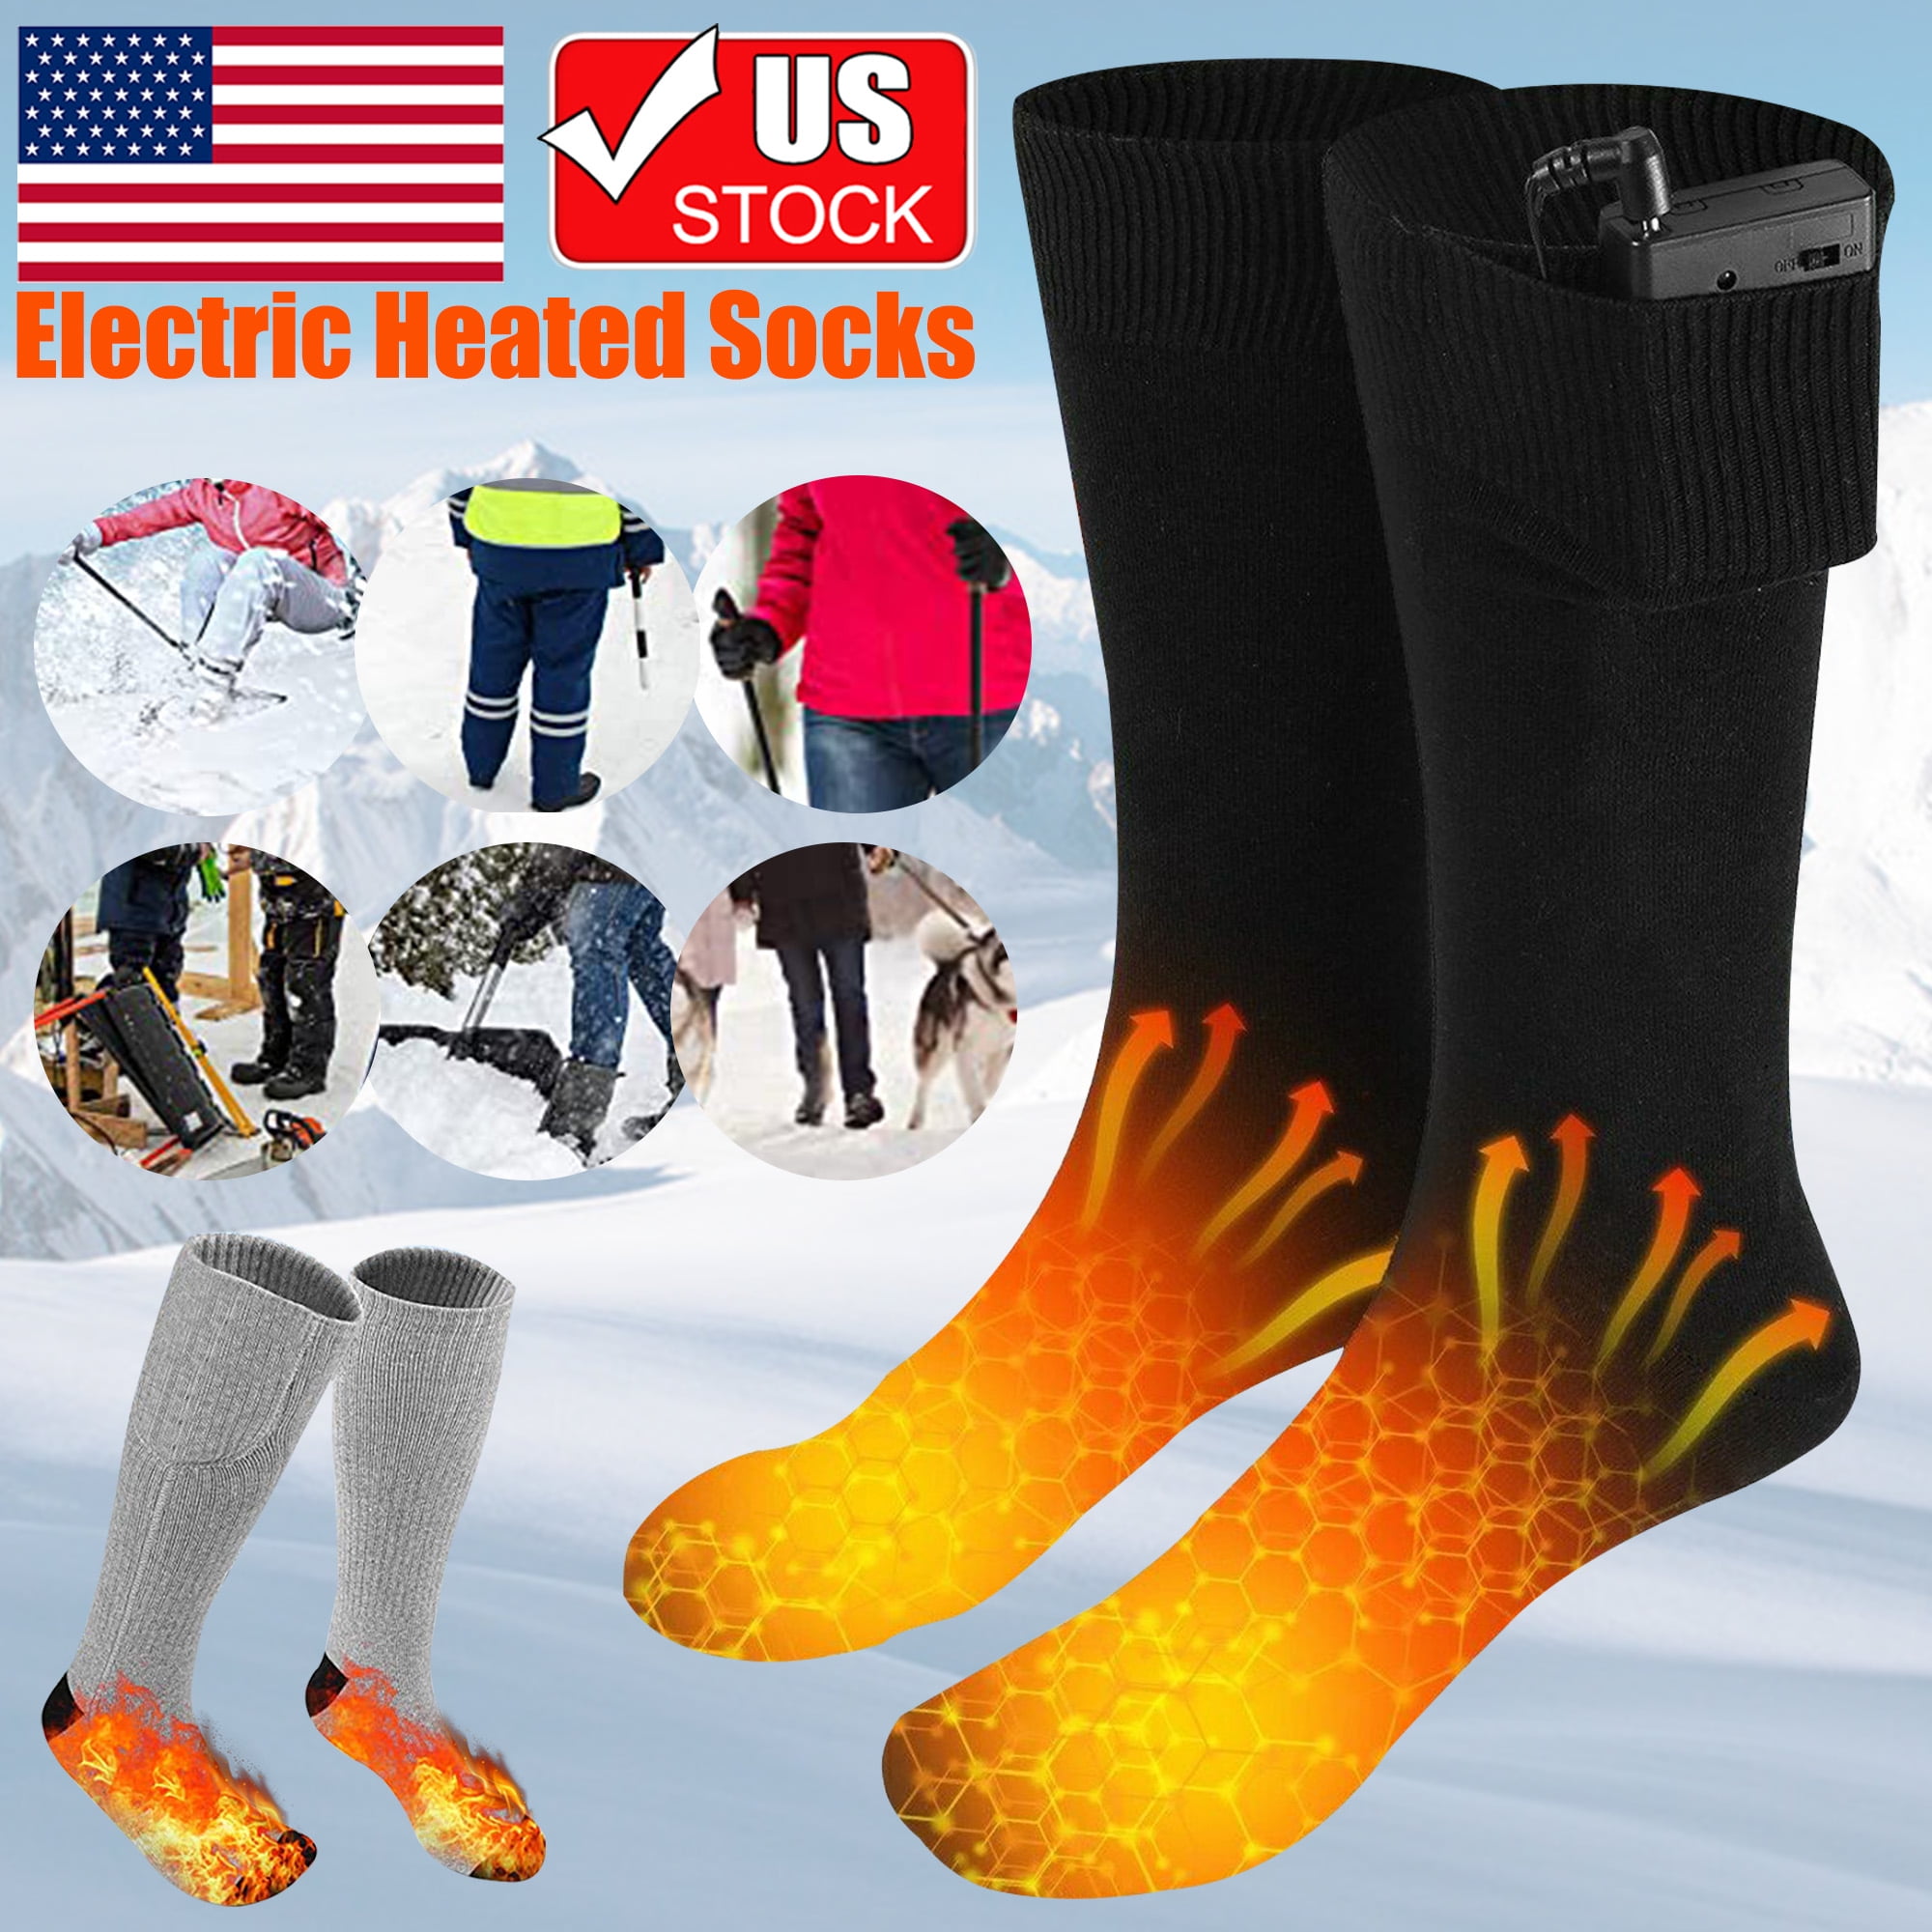 Heated Socks,Electric Heated Socks Thermal Insulated Sock Battery Powered Heat Sox Winter Foot Warmer Socks for Men and Women